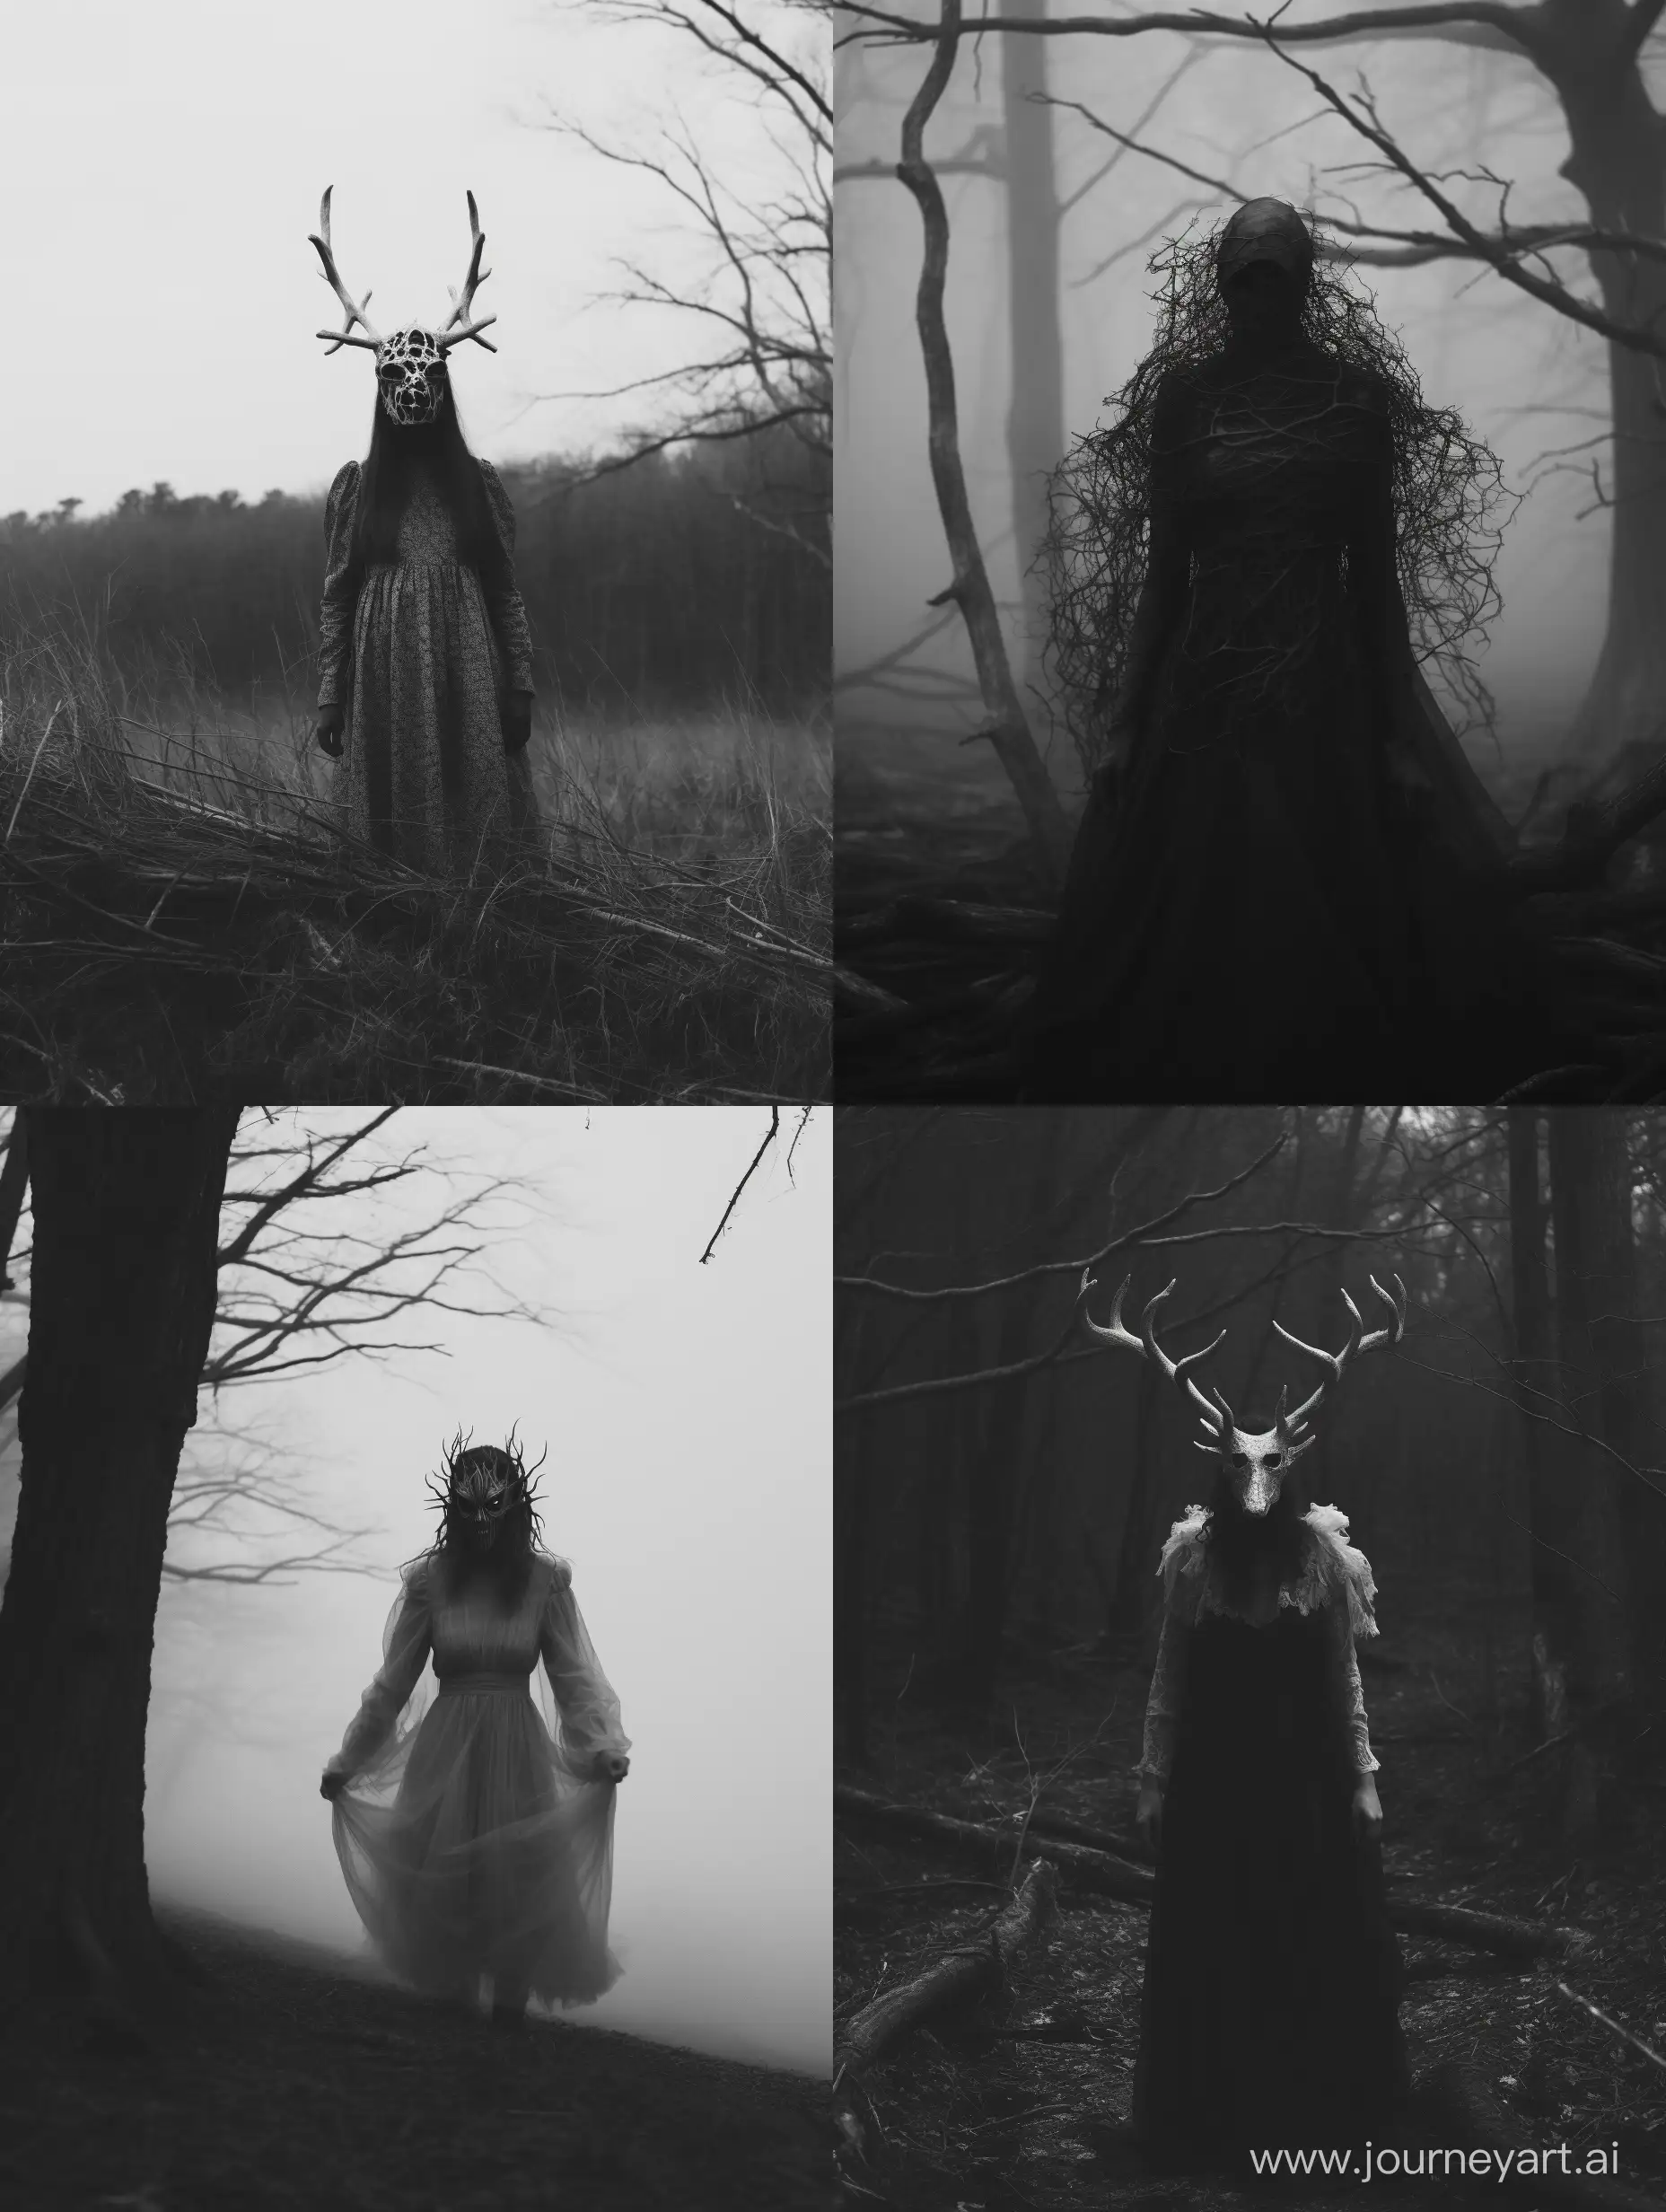 grayscale photo that evokes folk horror, capturing a mysterious and unsettling encounter between a person in a vintage dress and a ghostly mythical creature, the_ritual, creepypasta, folk horror, dark aesthetic, dark folk, dark magic, witch core